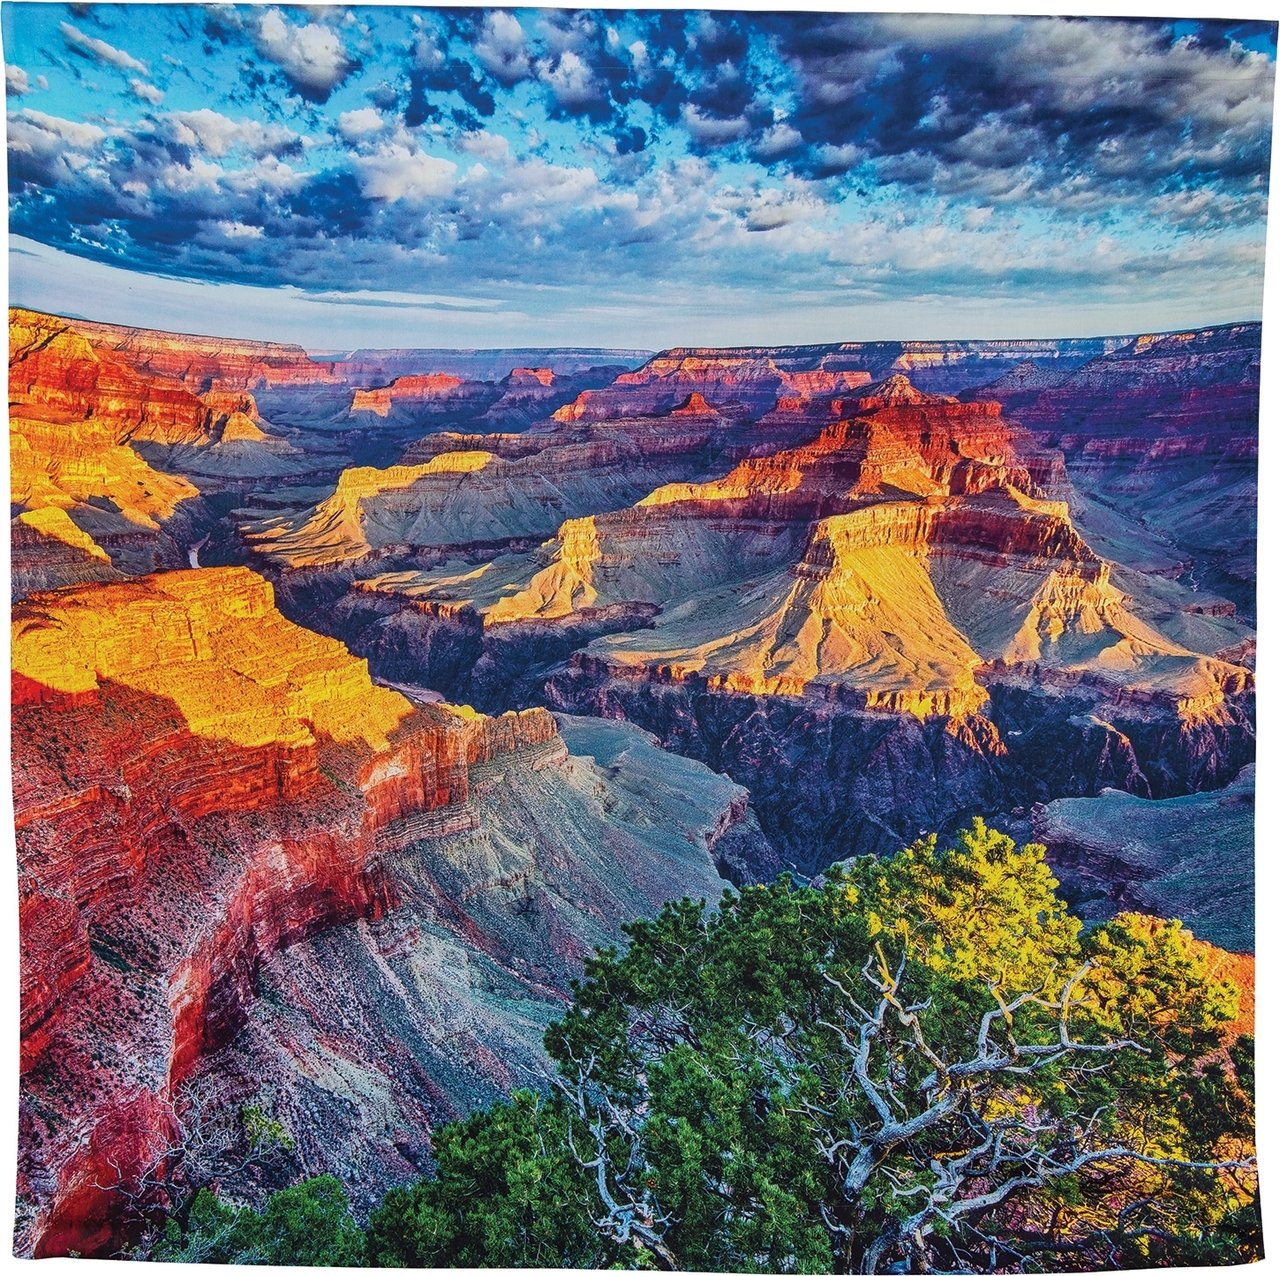  Grand Canyon Sunset Photo Tapestry and Hanging Wall Art (Extra Large, 4.8 x 4.8 Feet, 100% Cotton) - AsianImportStore.com - B2B Wholesale Lighting and Decor